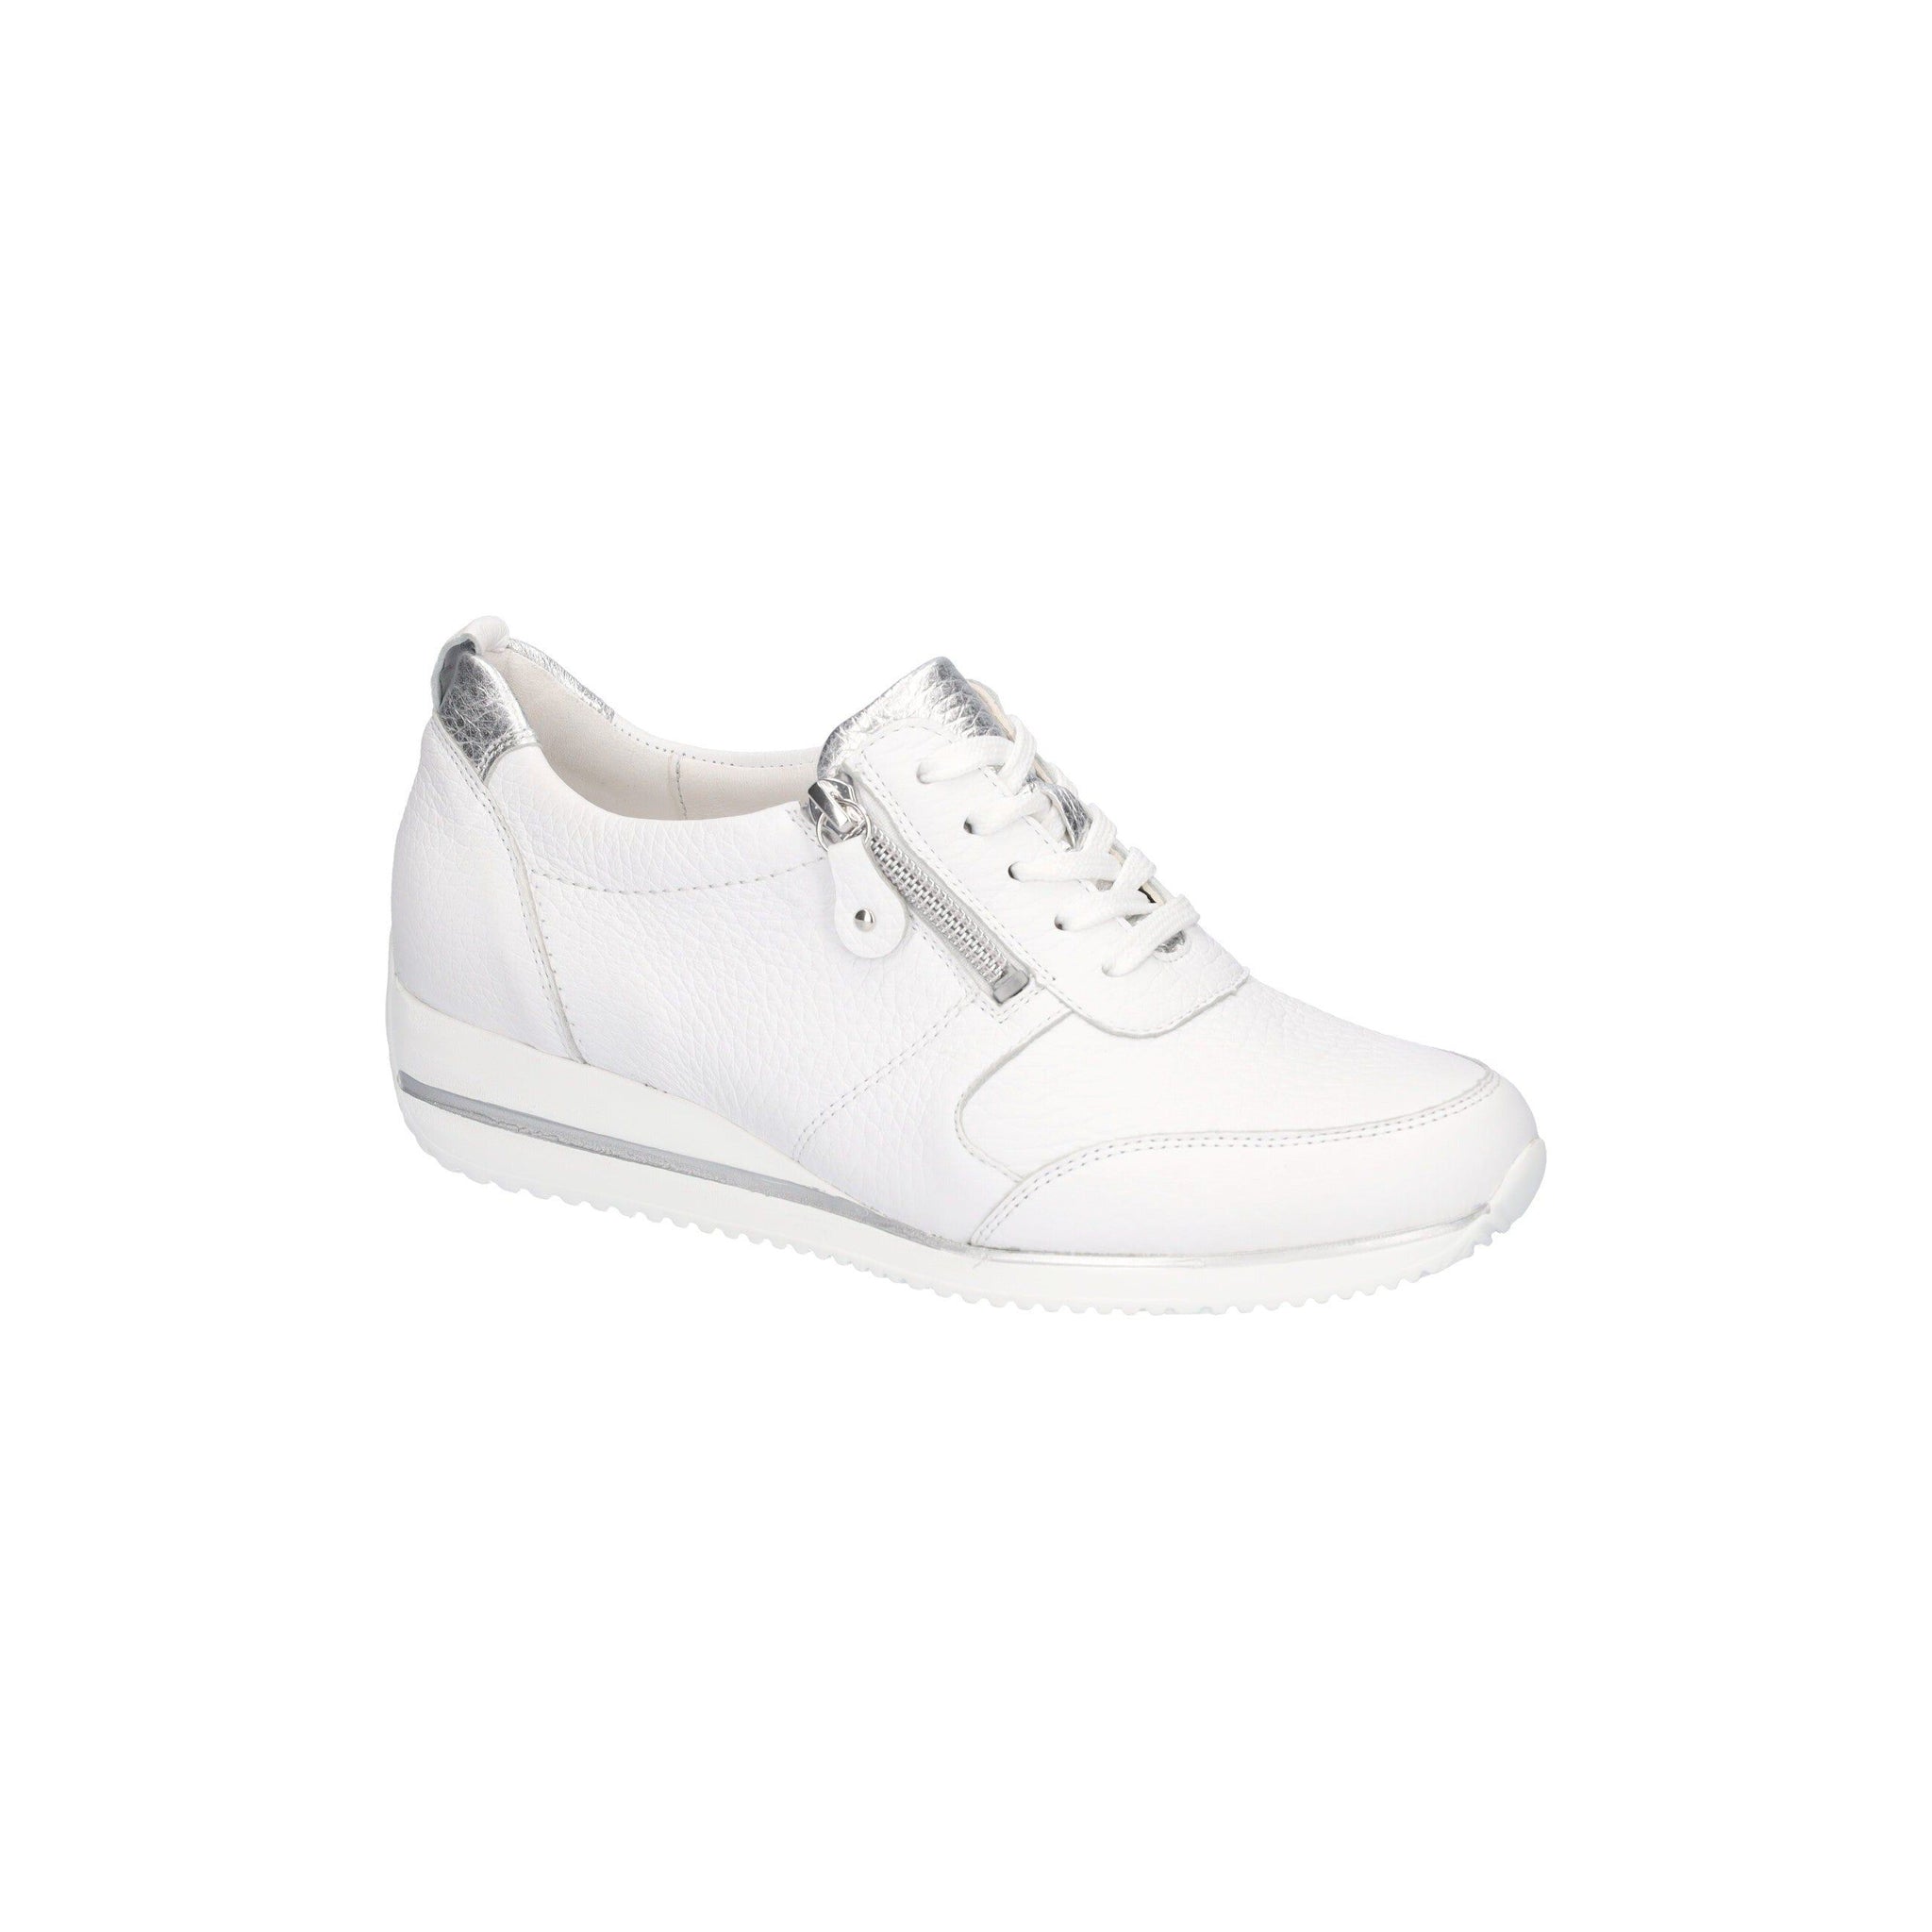 Waldlaufer Himona (980007)- Ladies Lace Trainer with Side Zip in White .Waldlaufer Shoes | Wide Fit| Wisemans | Bantry | Shoe Shop |&nbsp; West Cork | Munster| Ireland